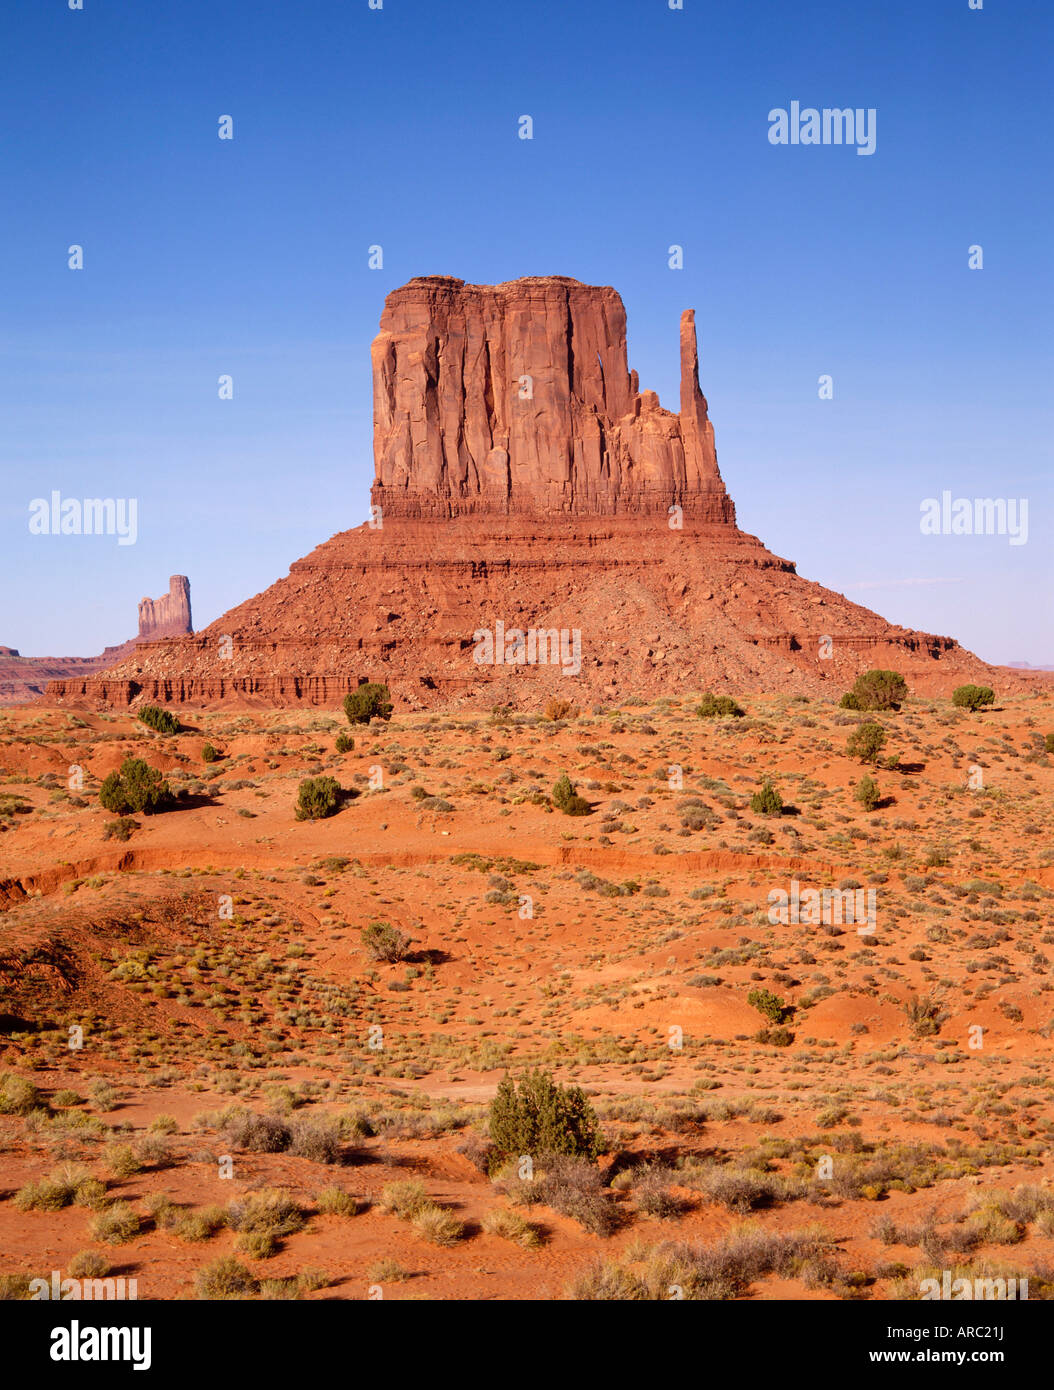 Rock formations known as The Mittens on the Navajo Tribal Reservation in Monument Valley, on the Utah Arizona border, USA Stock Photo